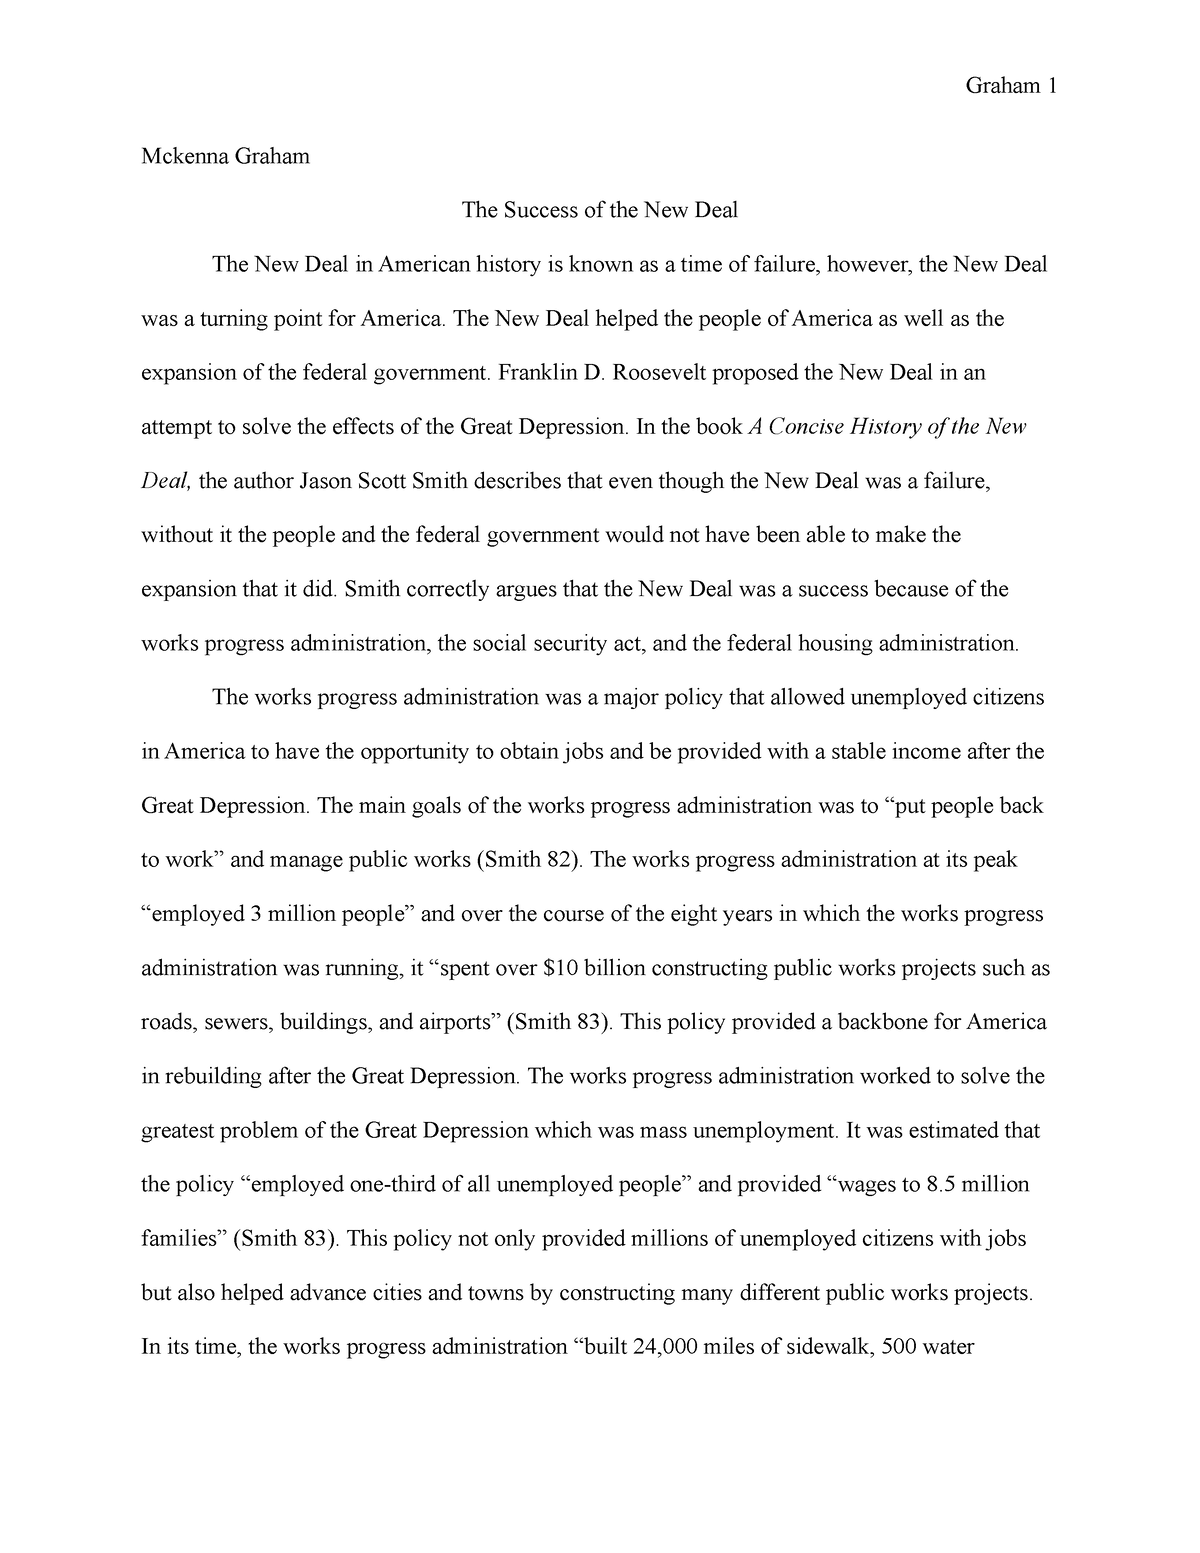 introduction of new deal essay